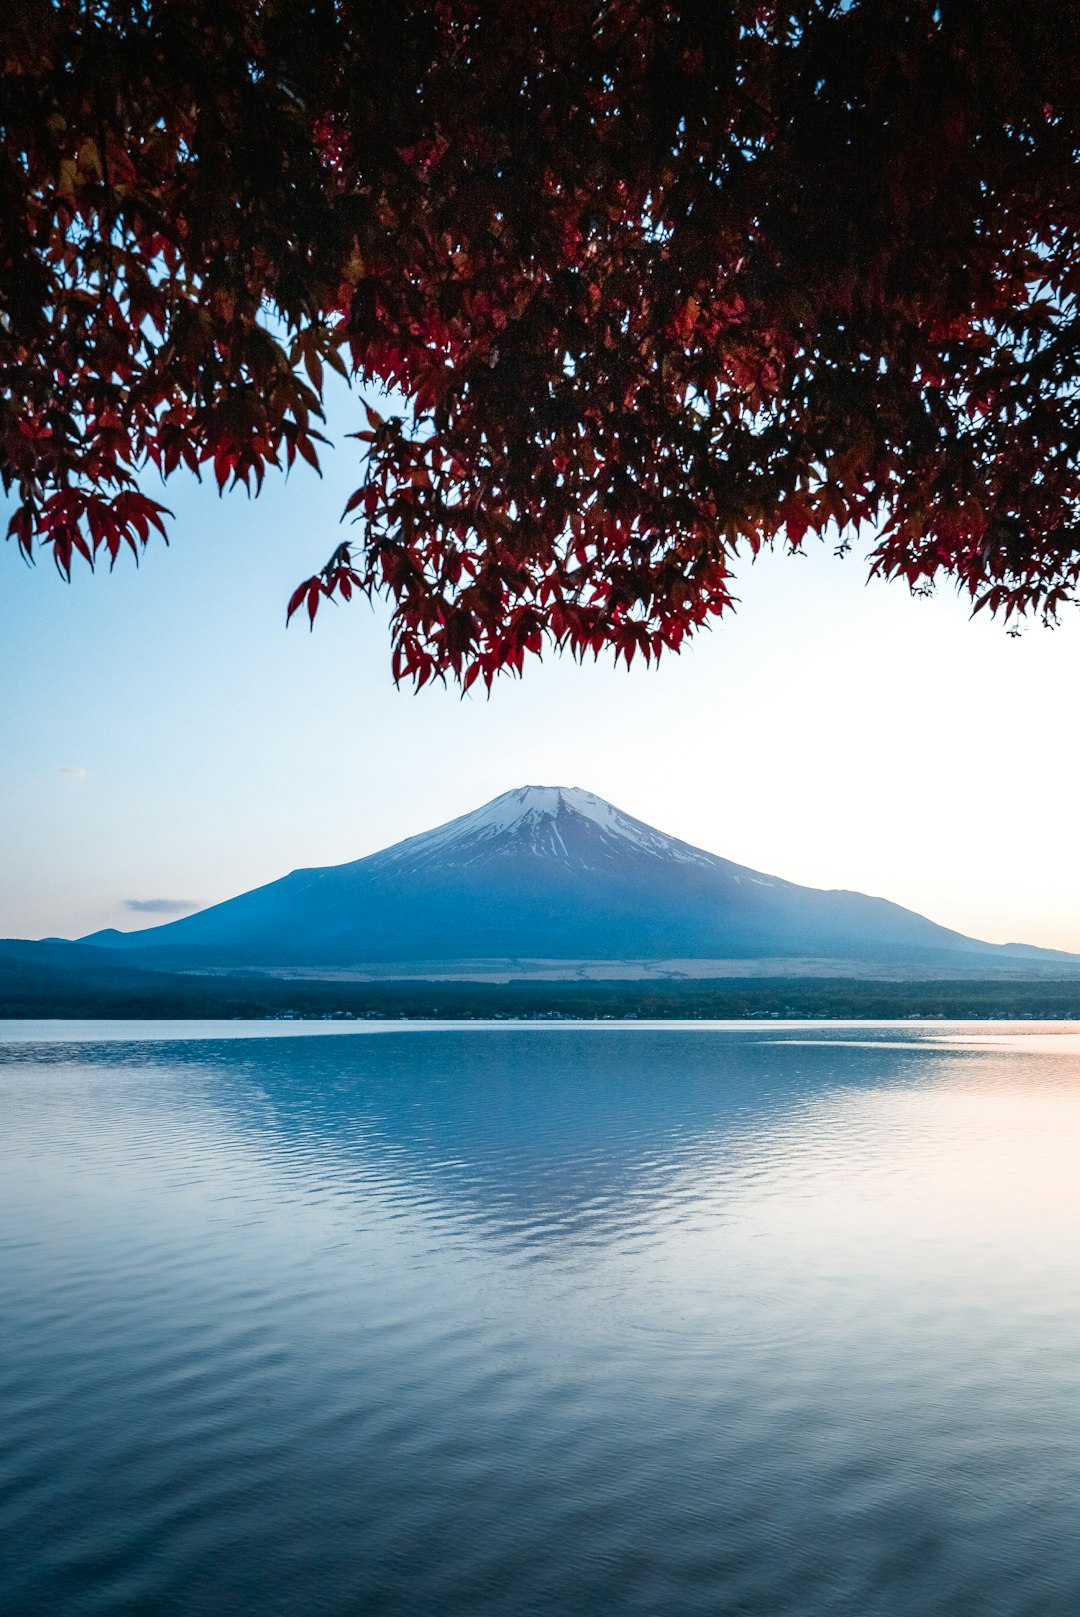 Travel Tips and Stories of Mount fuji in Japan